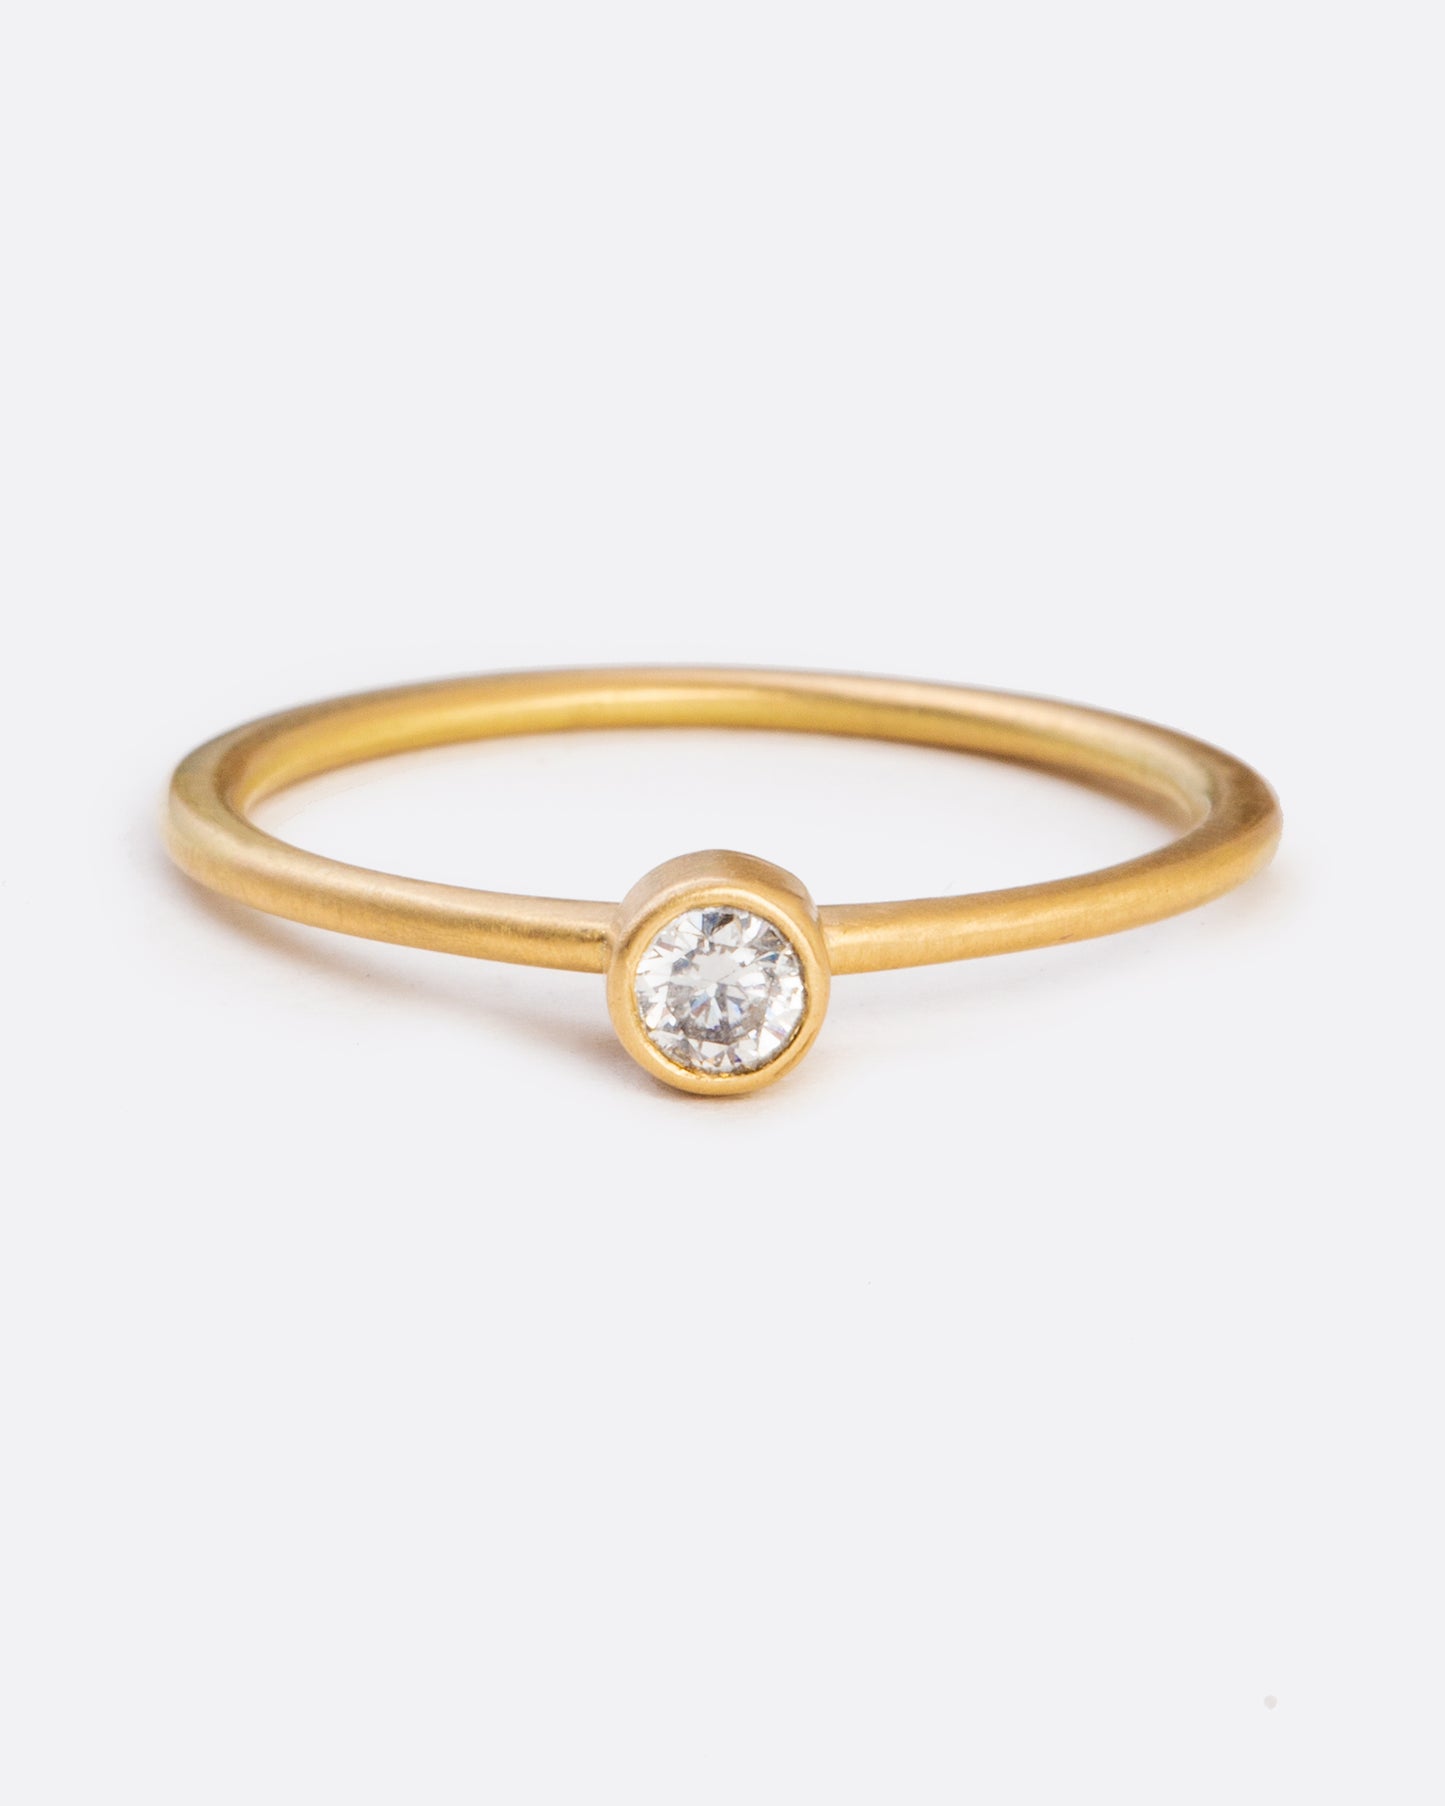 A simple ring, featuring a bezel set brilliant cut diamond with a lot of sparkle